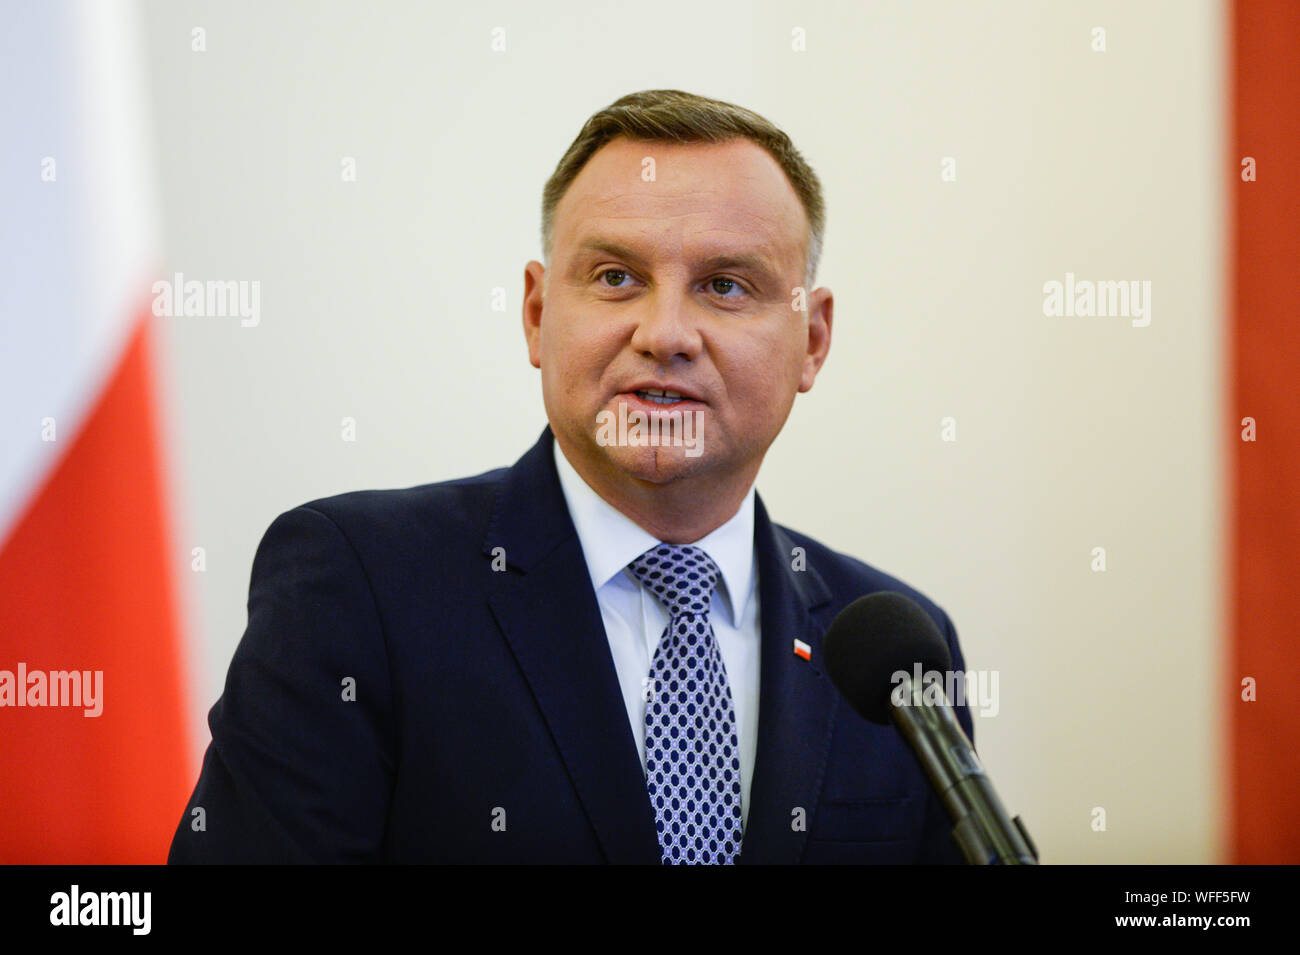 Warsaw, Poland. 31st Aug, 2019. President of Poland, Andrzej Duda speaks during a press conference after bilateral meetings at the Presidential Palace. Volodymyr Zelensky arrives in Warsaw ahead of the 80th anniversary of the outbreak of World War II where more than 40 international delegations will be present including Germany's Chancellor, Angela Merkel, and US Vice President, Mike Pence. Credit: SOPA Images Limited/Alamy Live News Stock Photo